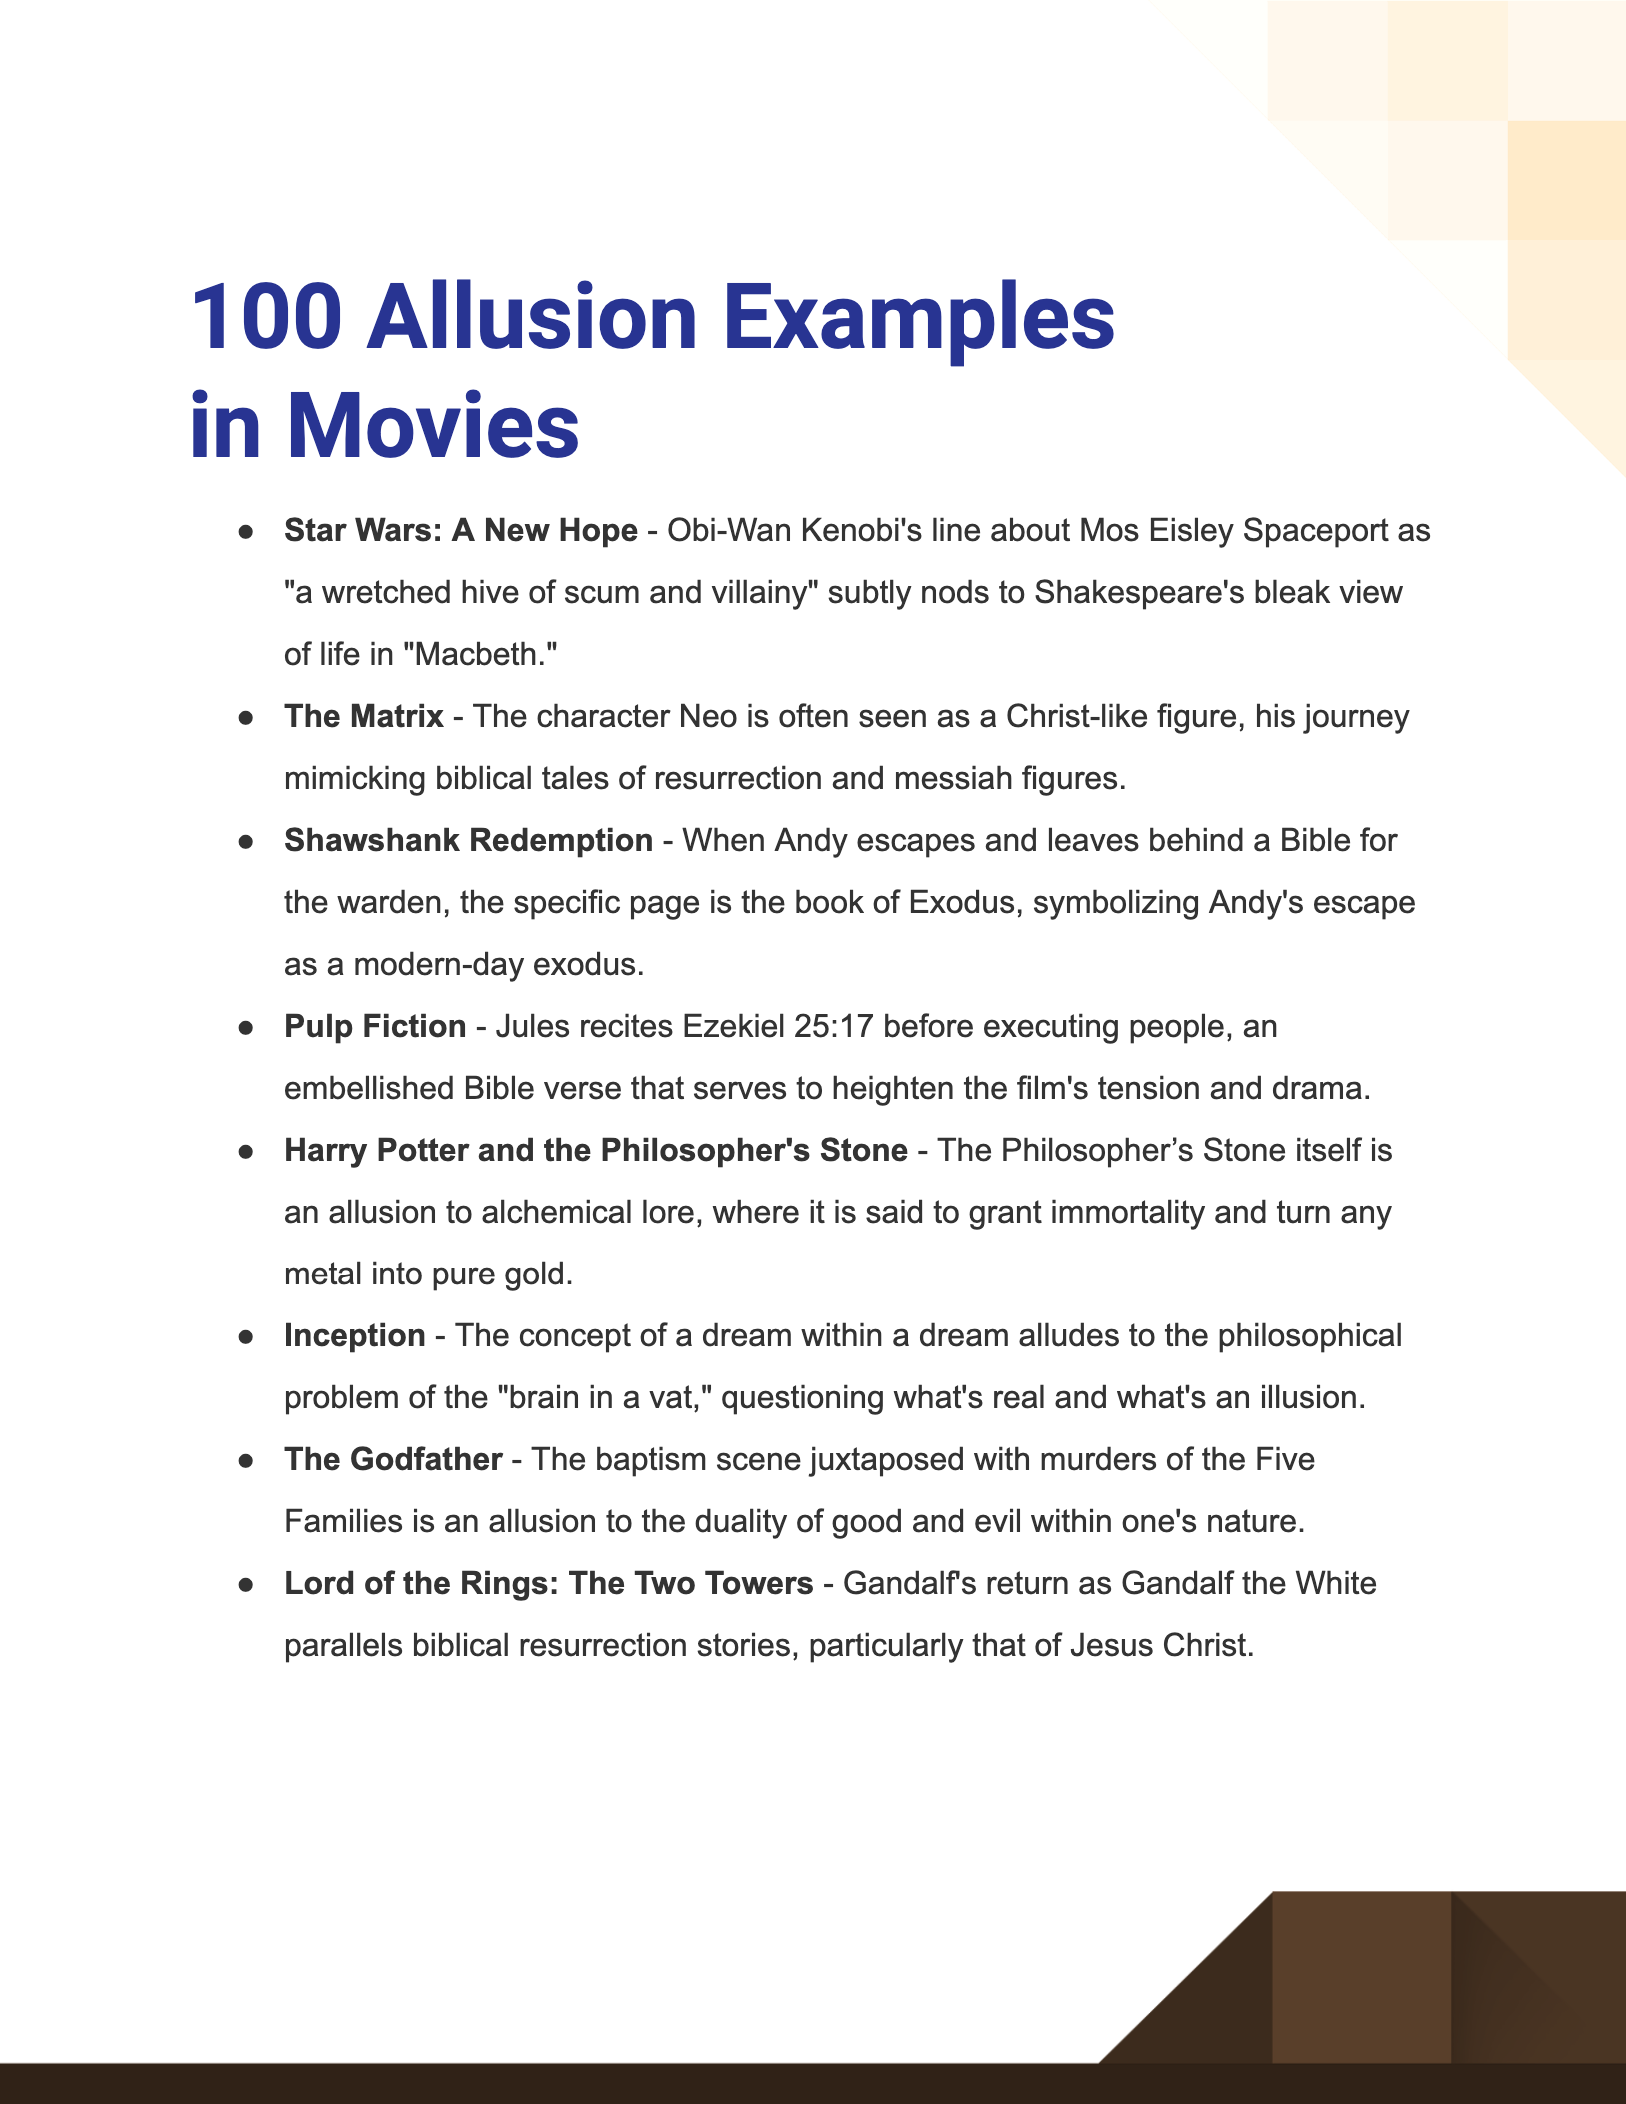 allusion examples in movies1